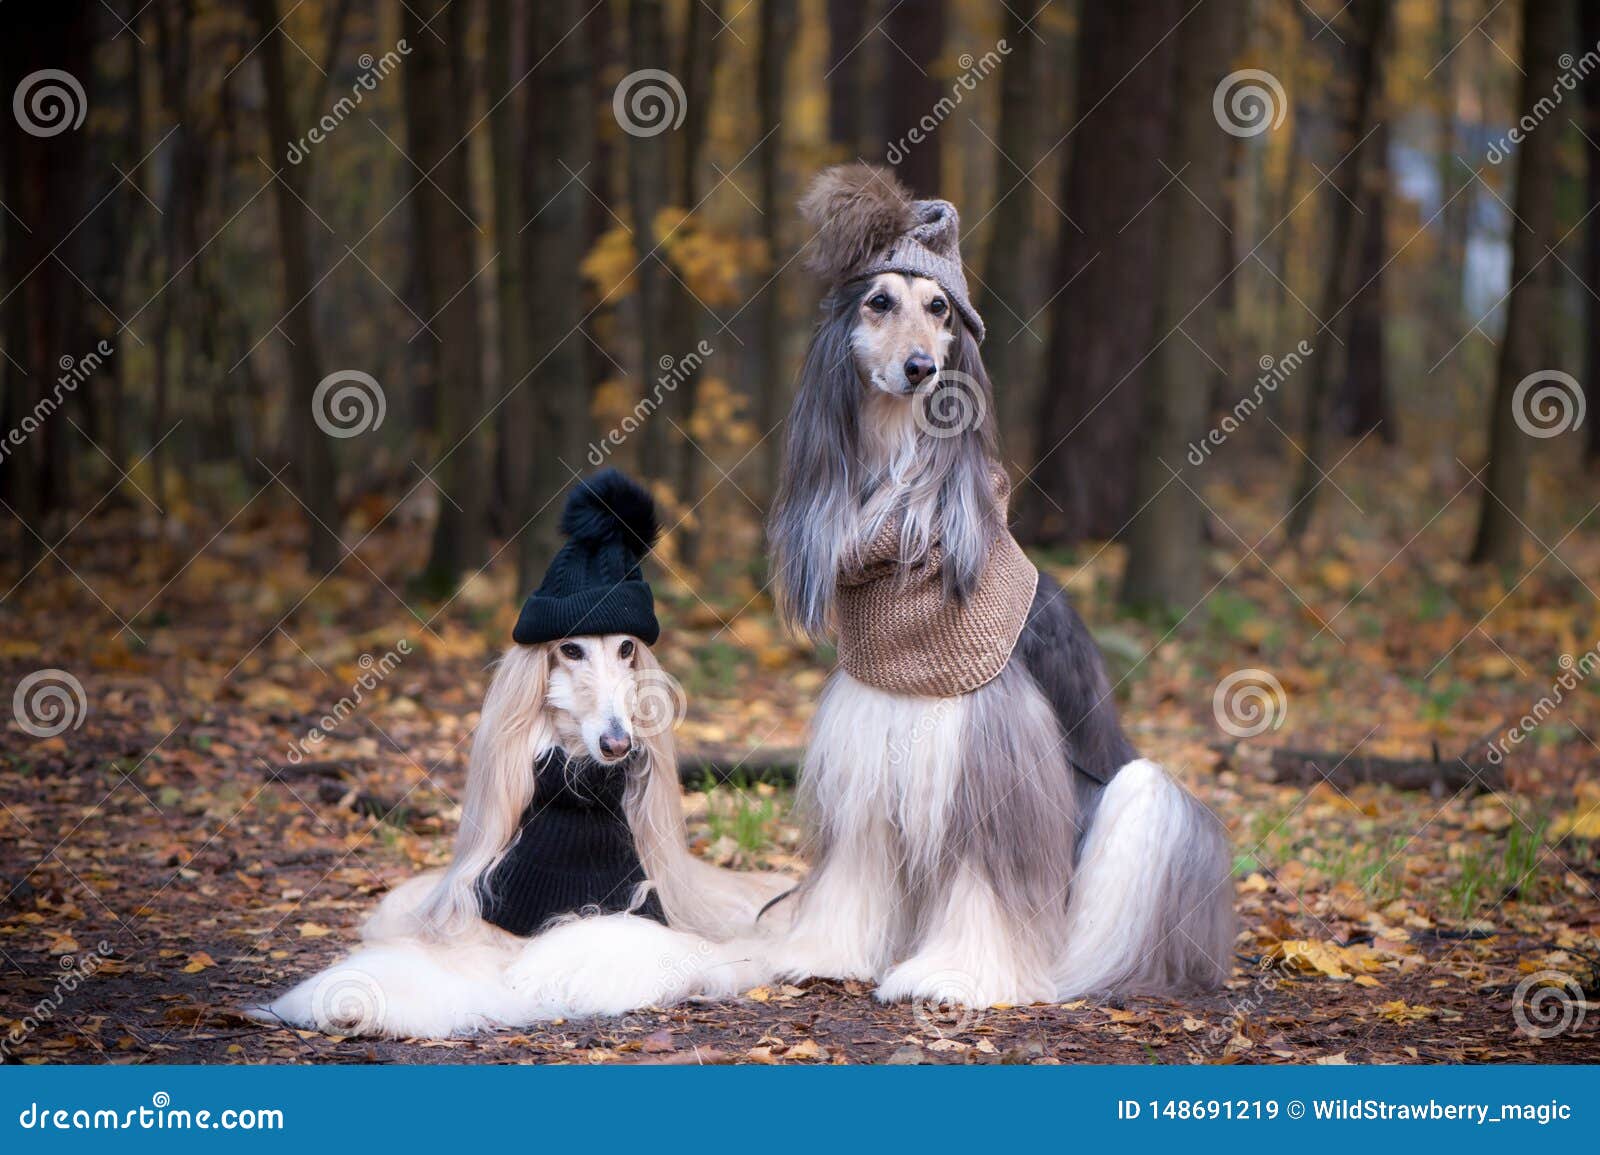 Dogs, Two Funny, Very Cute Afghan Hounds Hats and Scarves Stock Image -  Image of background, dedication: 148691219